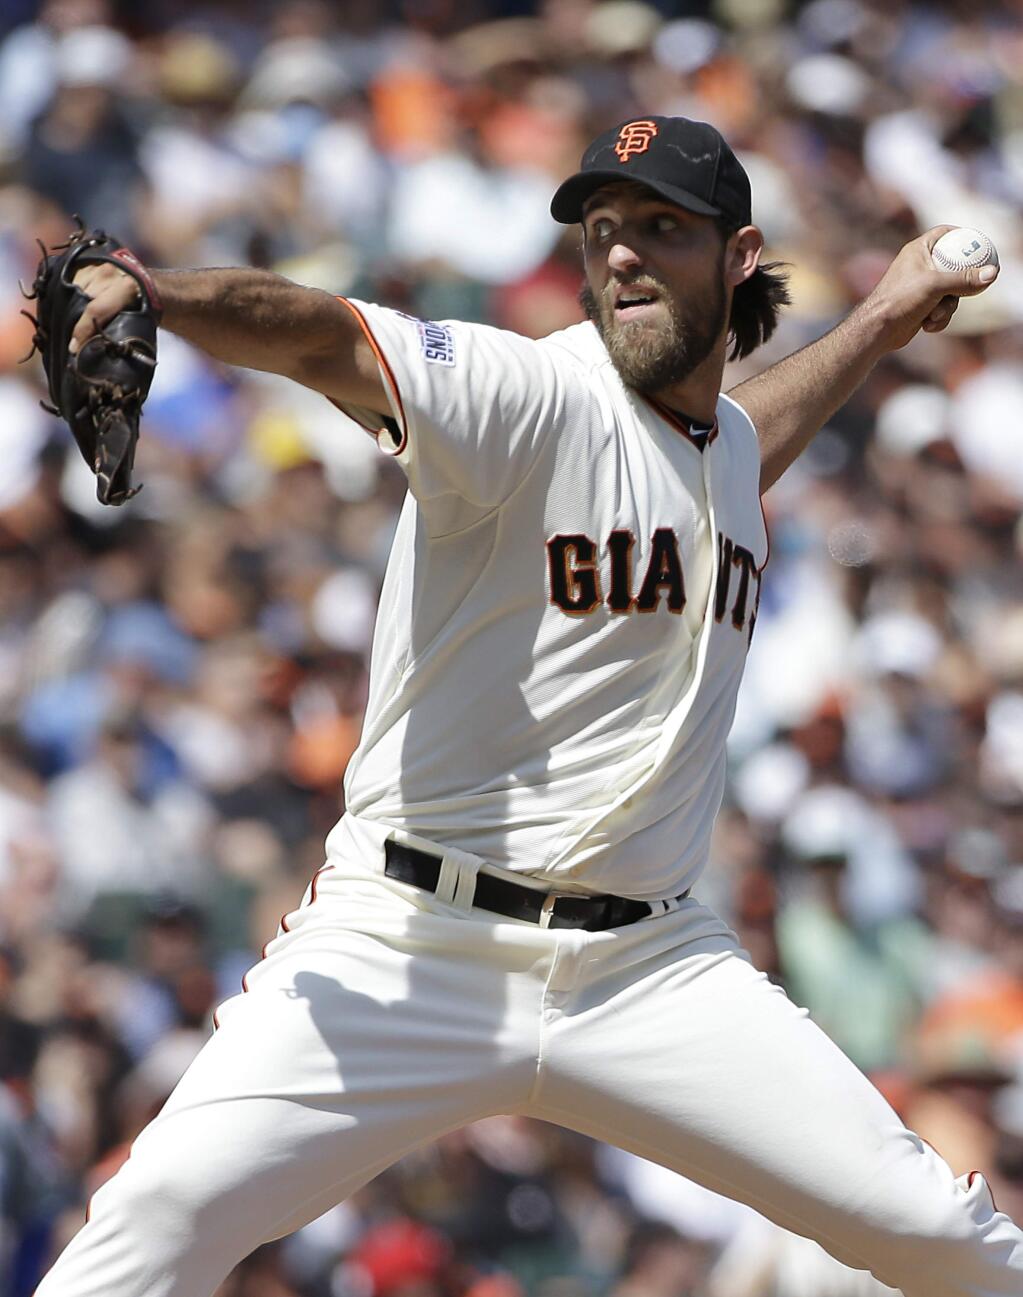 San Francisco Giants pitcher Madison Bumgarner throws against the Chicago Cubs during the sixth inning of a baseball game in San Francisco, Thursday, Aug. 27, 2015. (AP Photo/Jeff Chiu)